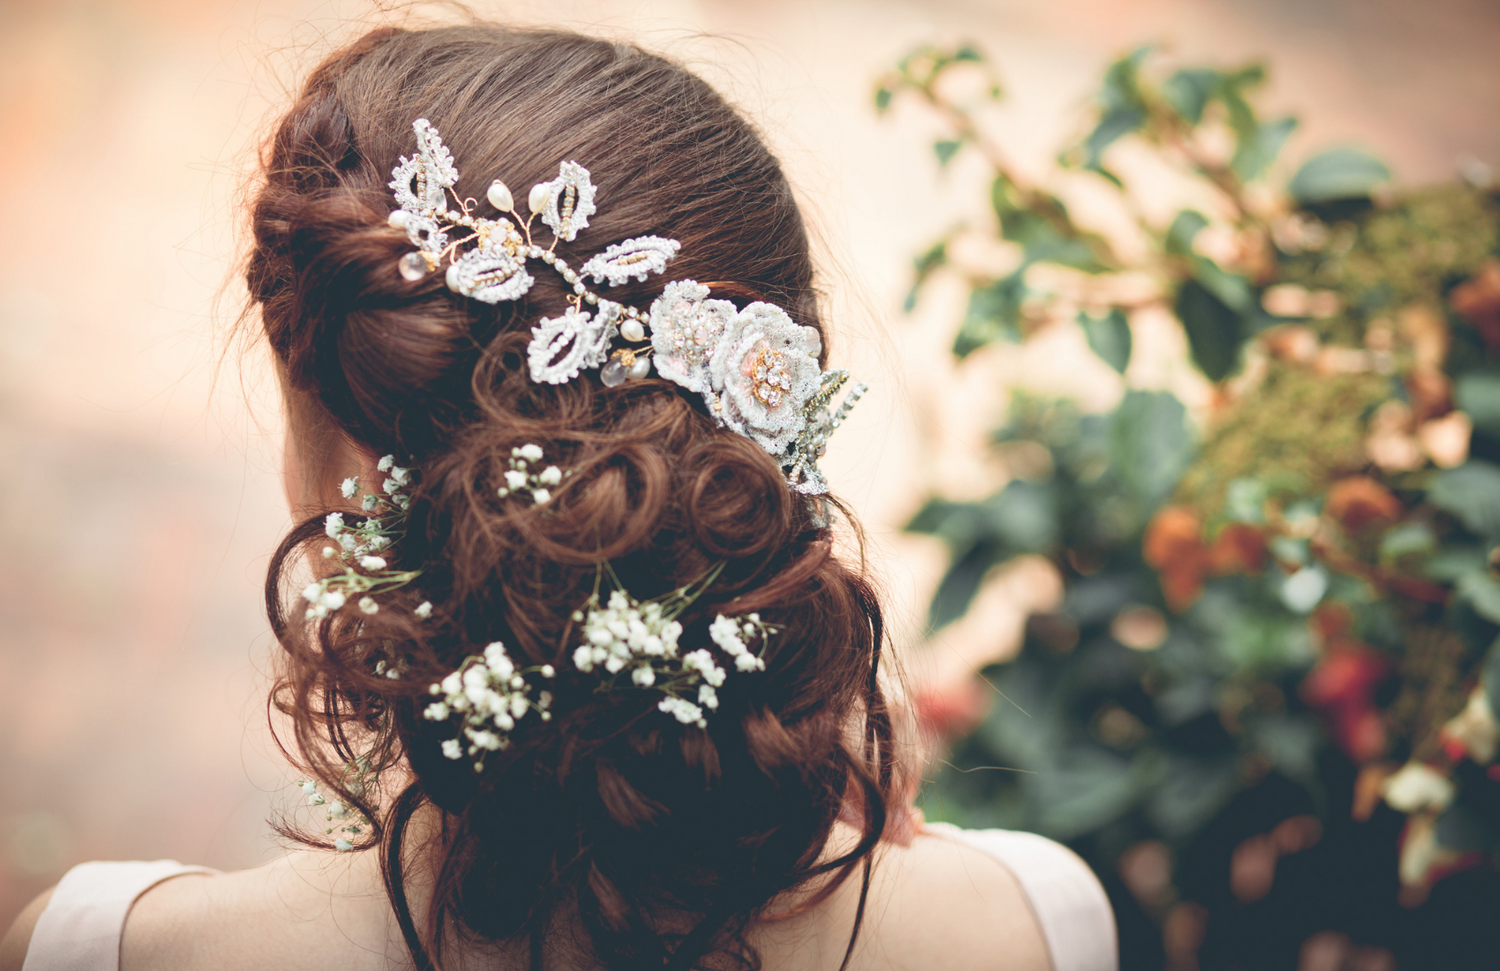 behind woman's head of hair flowers and hair jewelry placed throughout it 